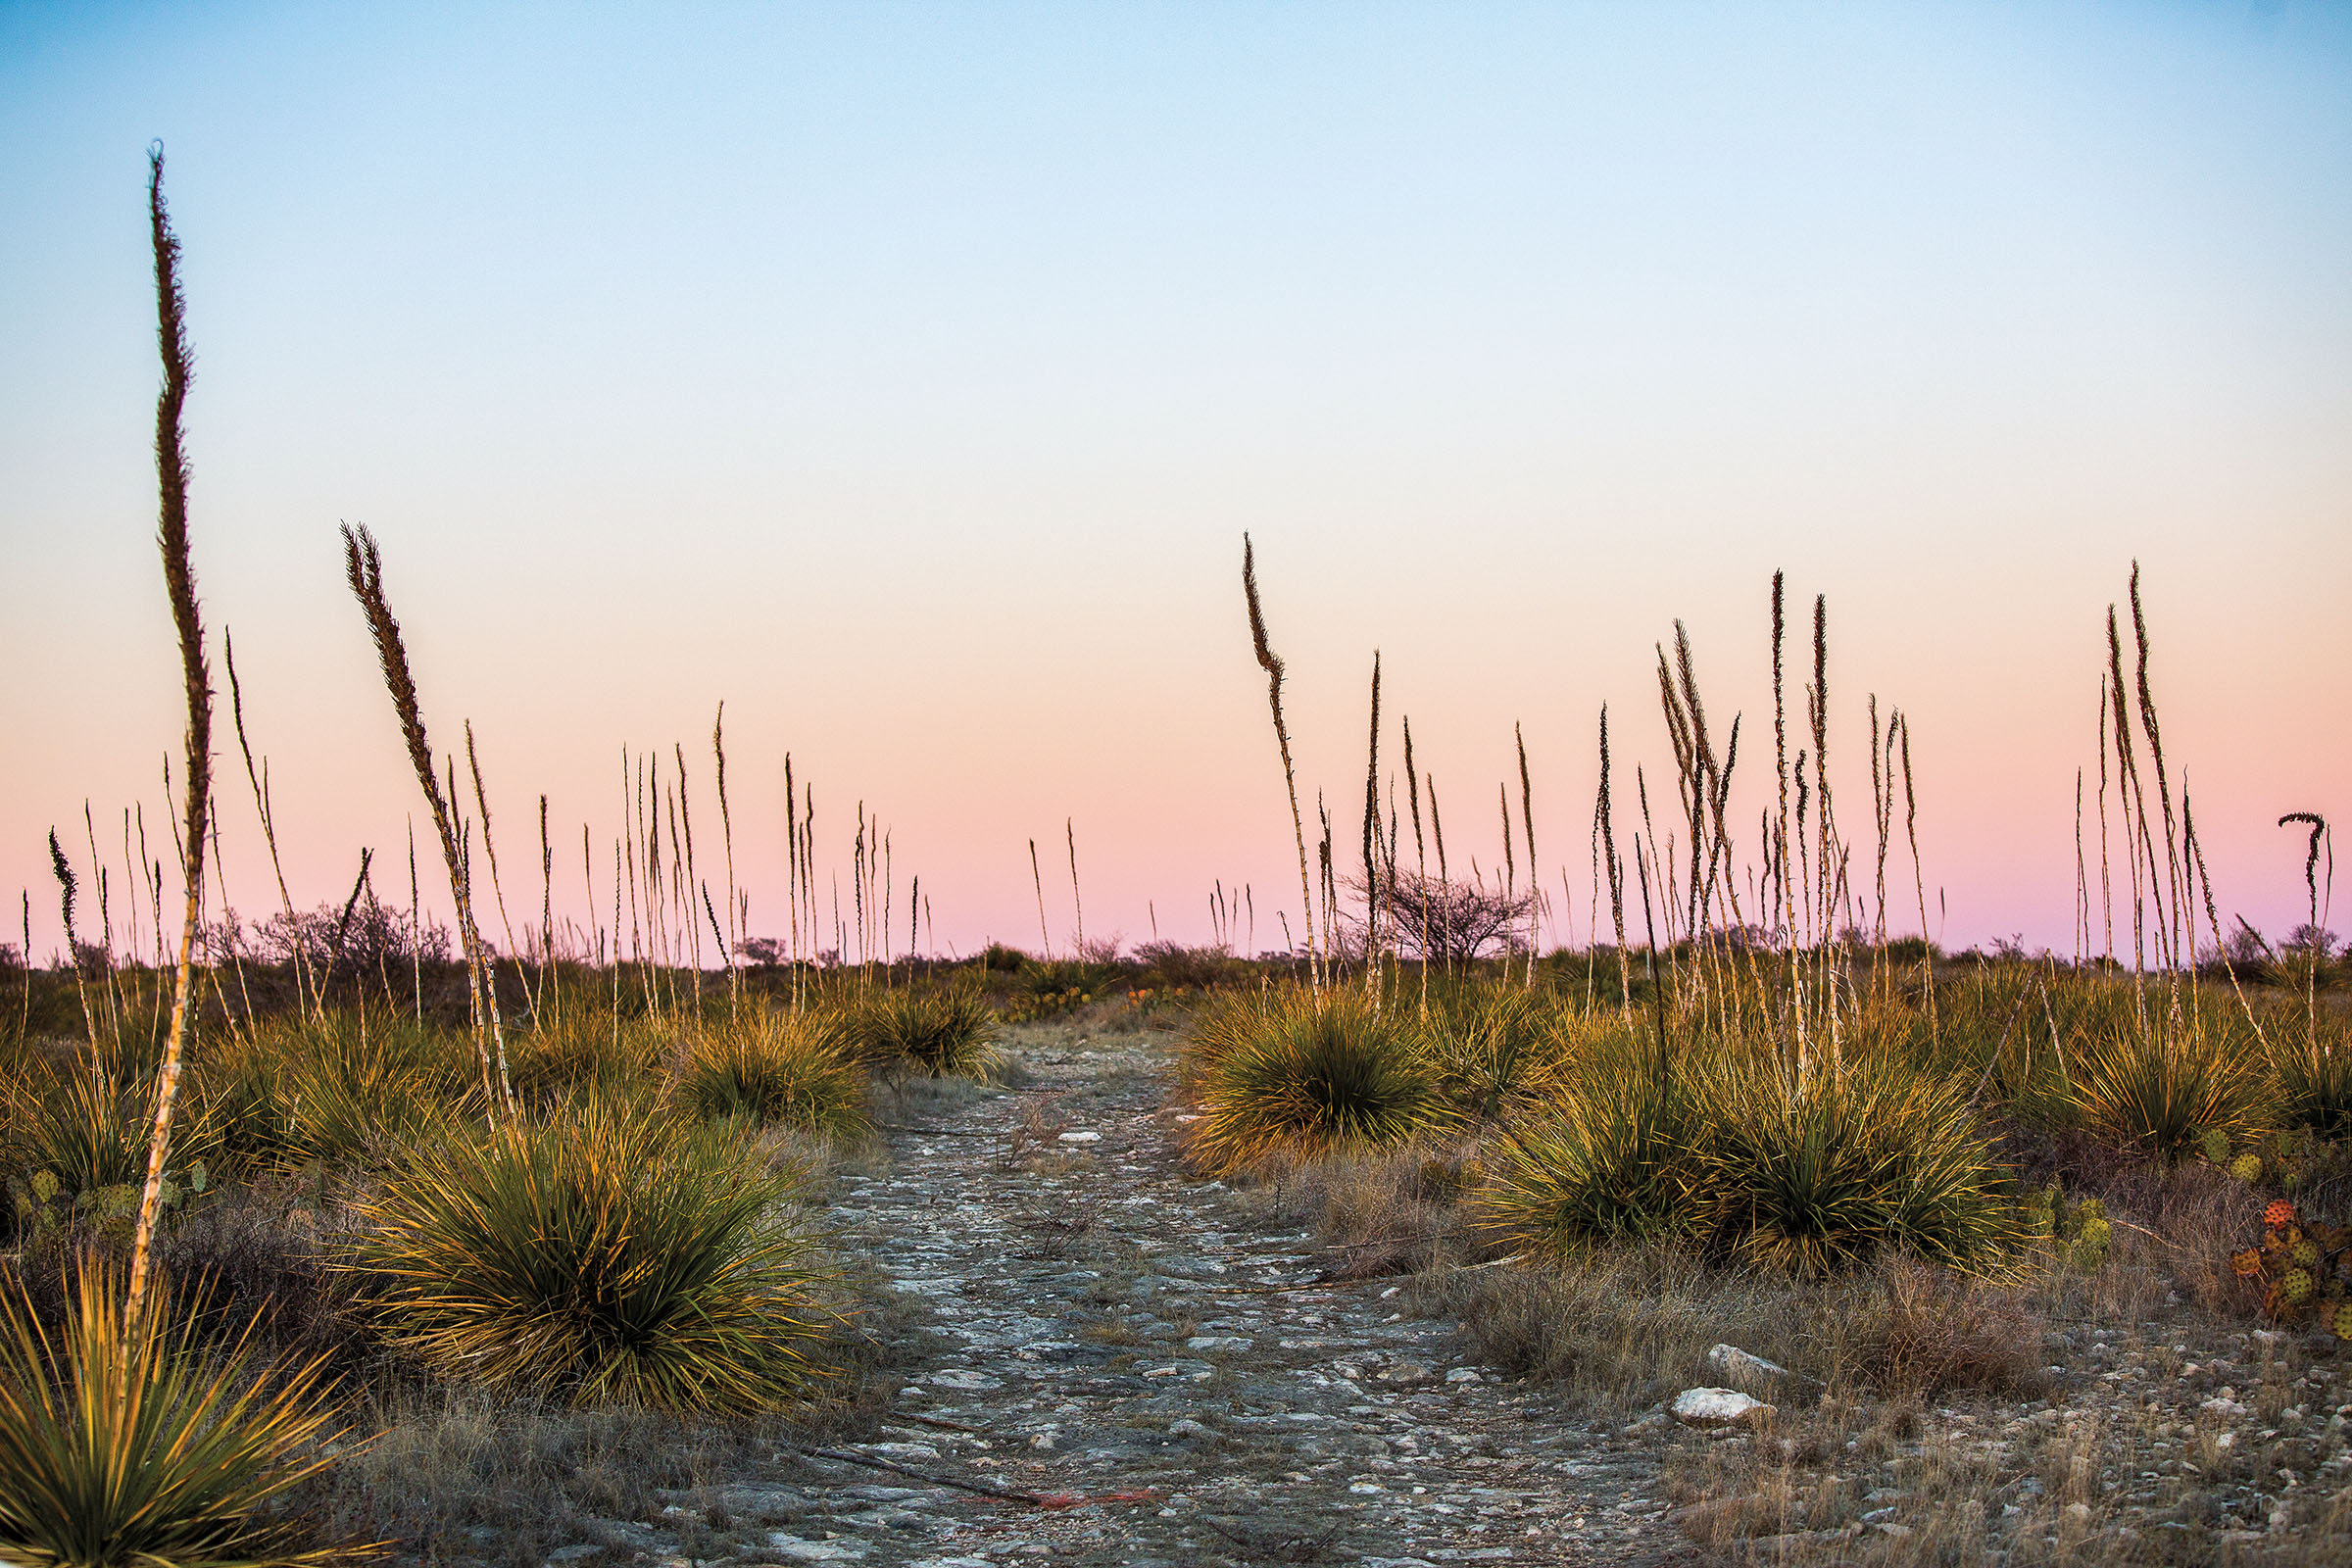 Green sotol plants along a gray dirt road stand tall against a blue and pink sunset